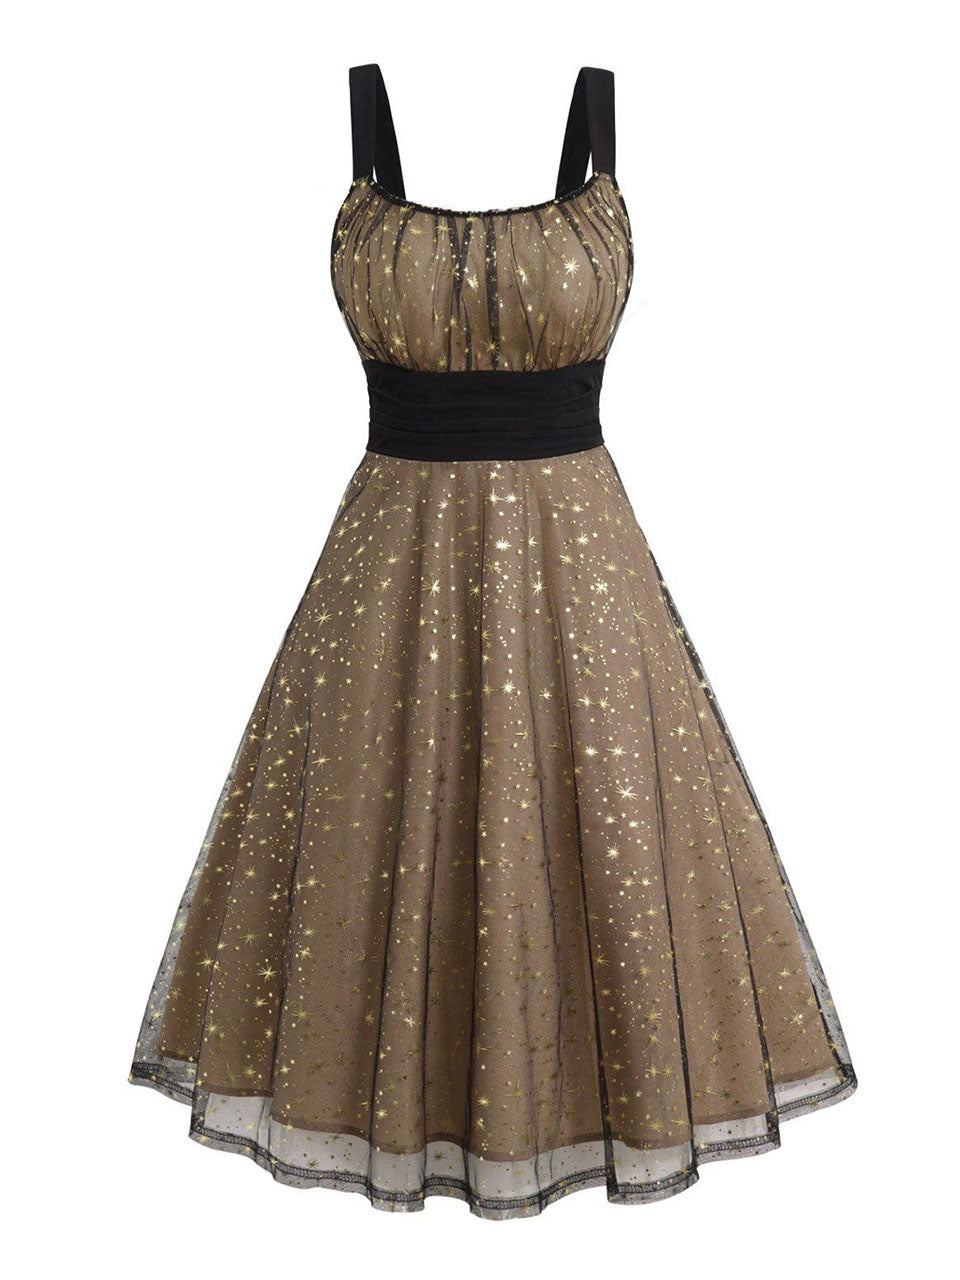 Gold Star Sequin 1950s Vintage Party Dress